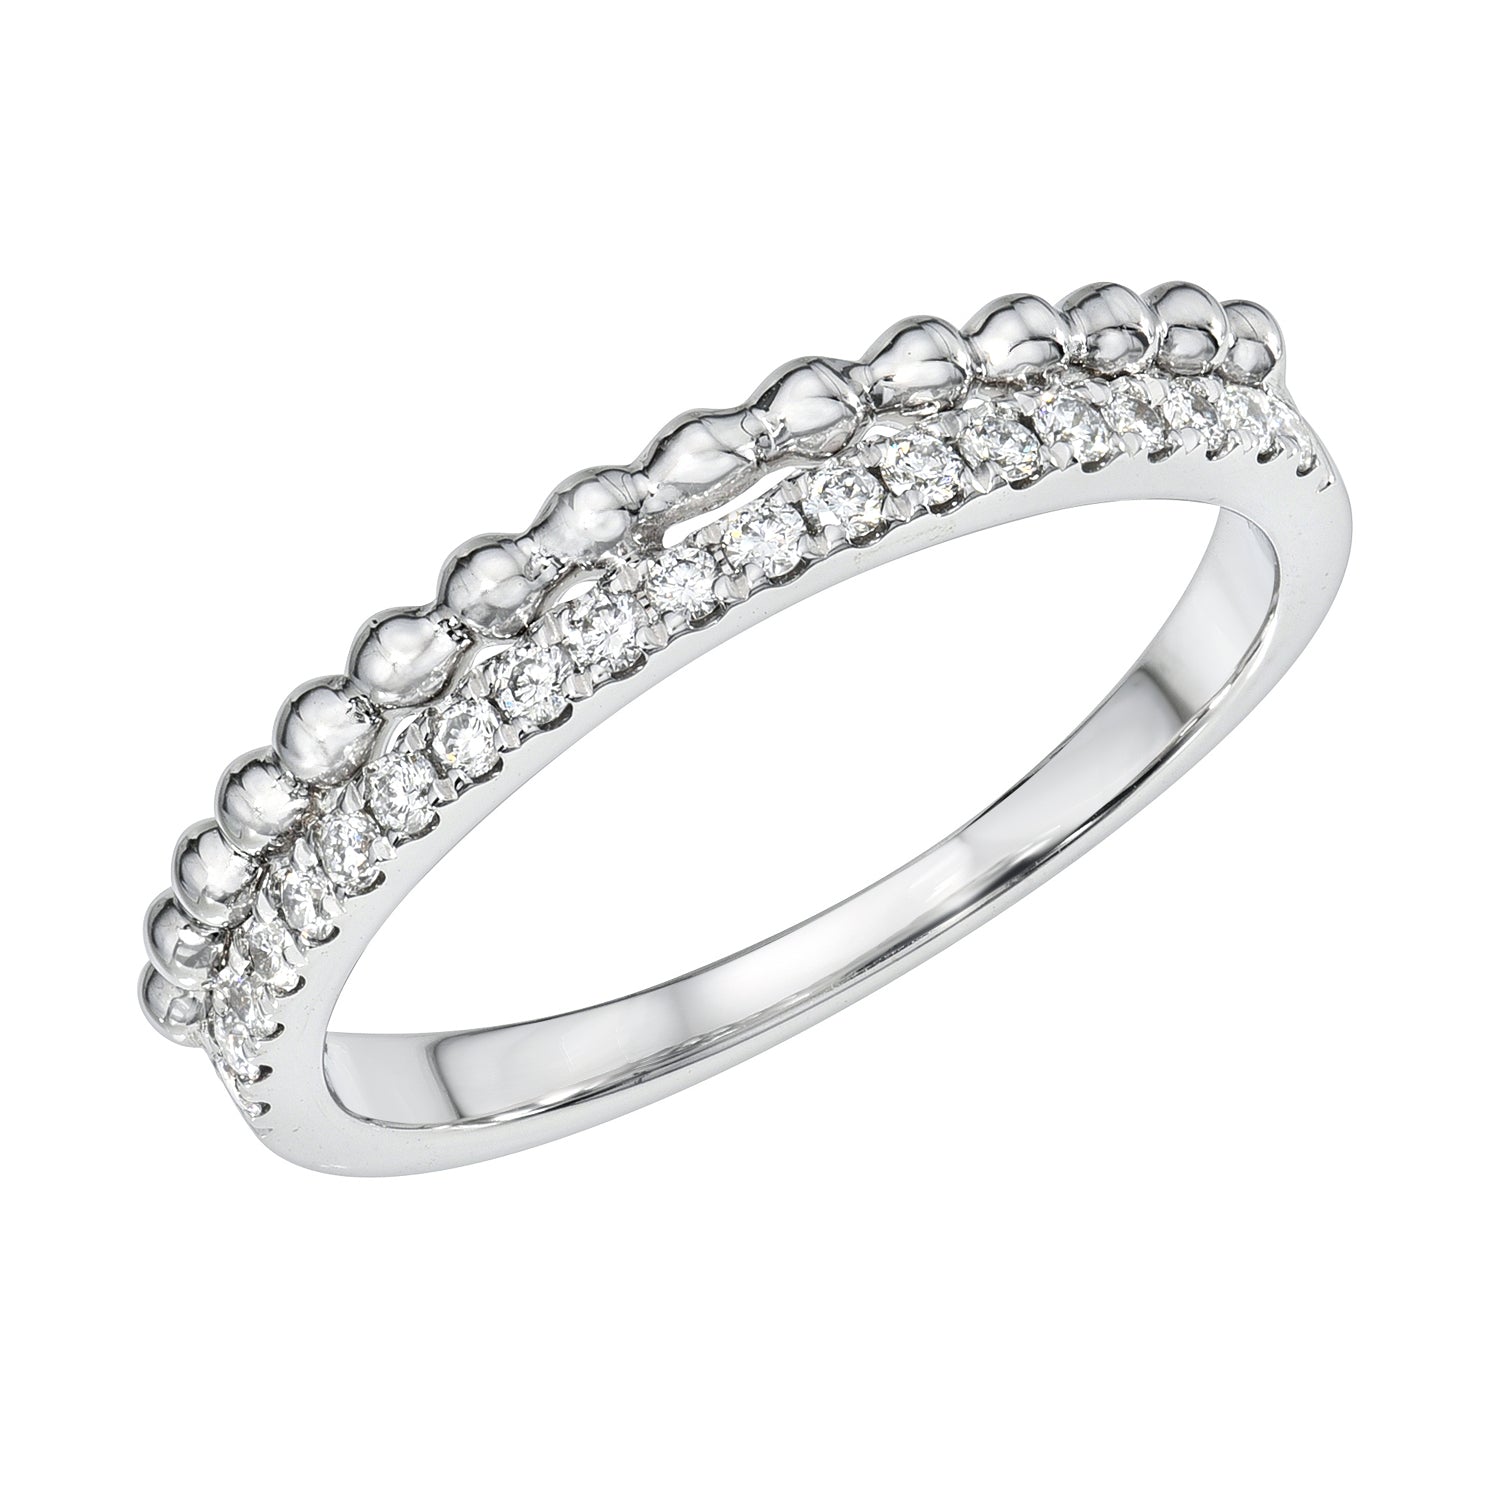 Beaded and Pave Diamond Ring